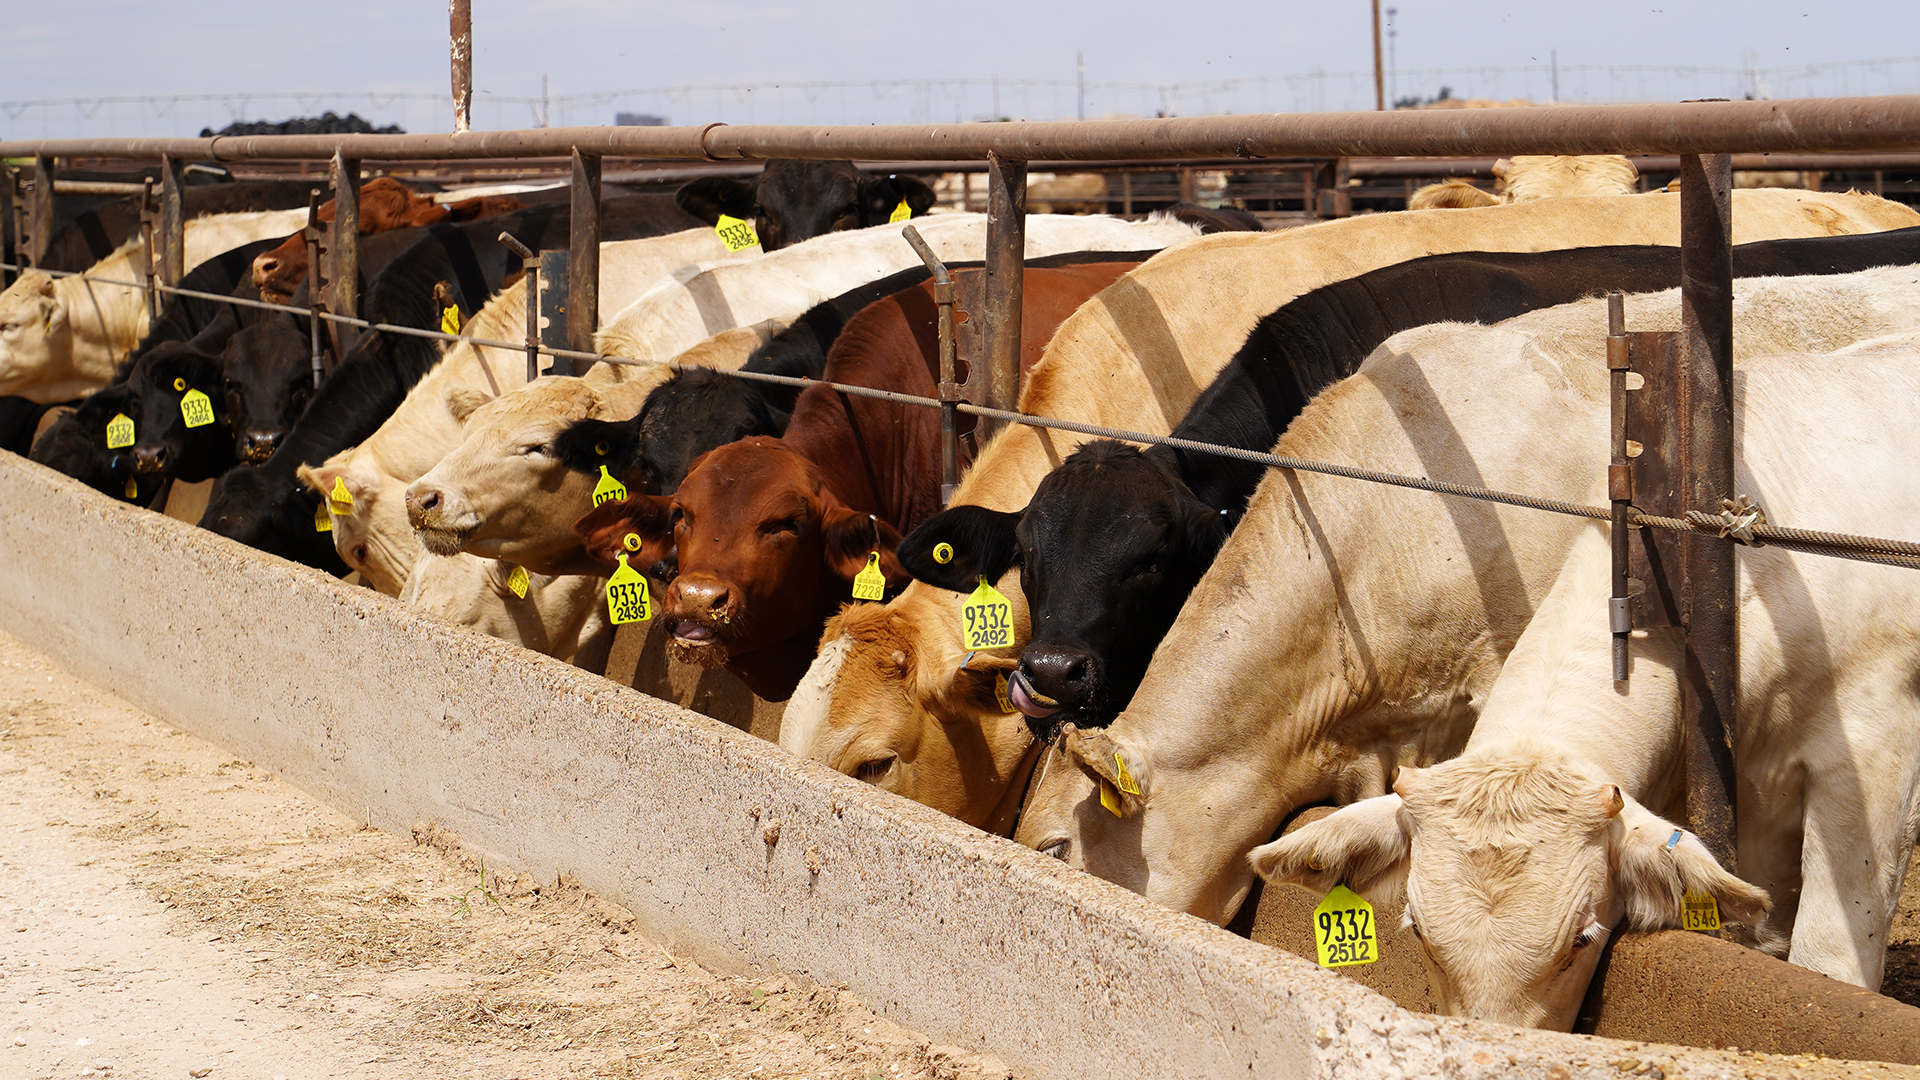 feedlot, liquid feed, custom blends, suspensions, commodities, stress mix, westway feed products